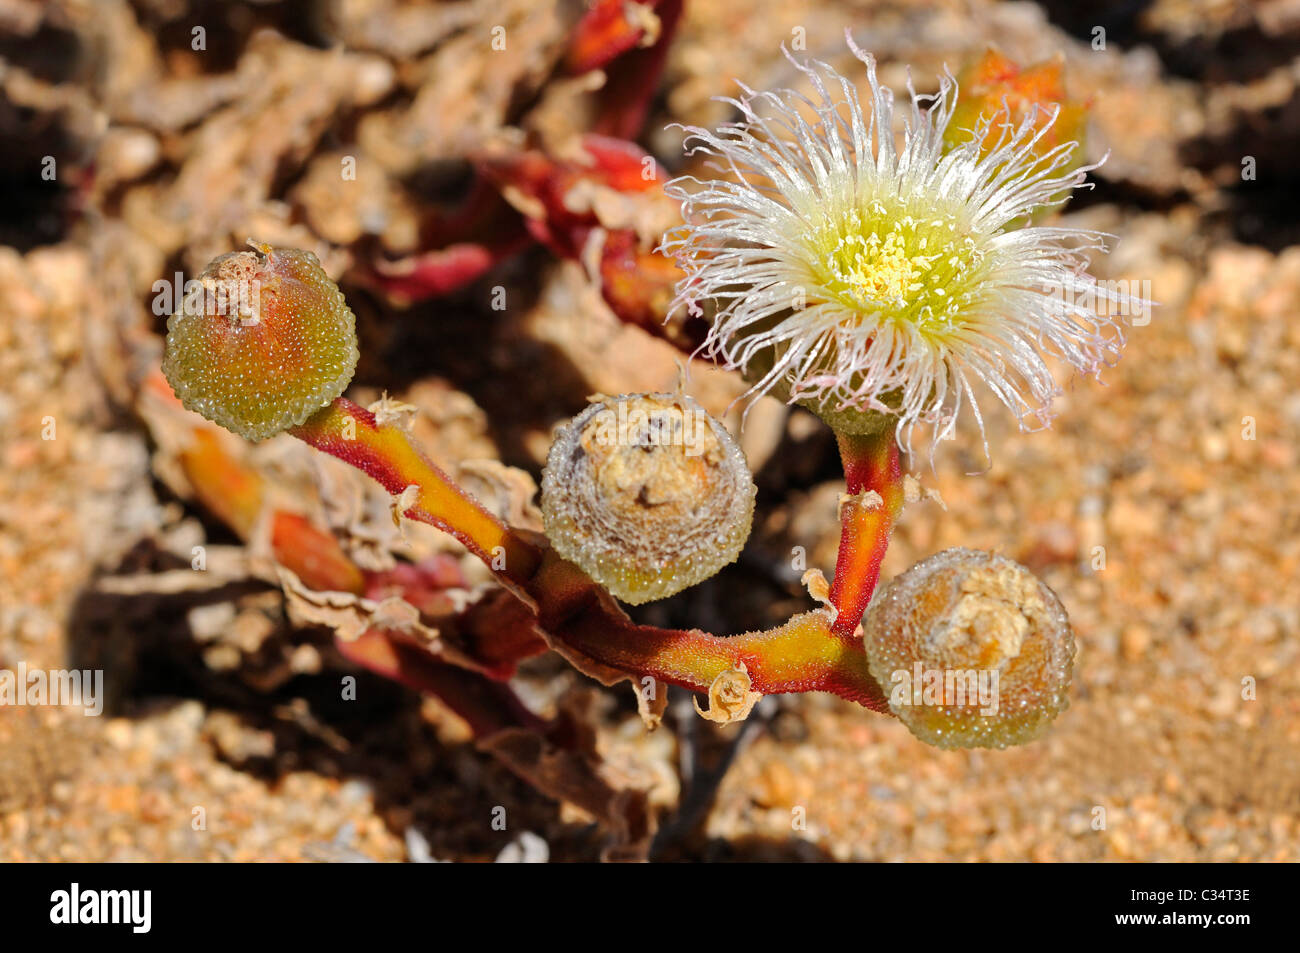 Blooming Mesmbryanthemum sp. in habitat, ice plant, Aizoaceae, Mesembs, Goegap Nature Reserve, Namaqualand, South Africa Stock Photo